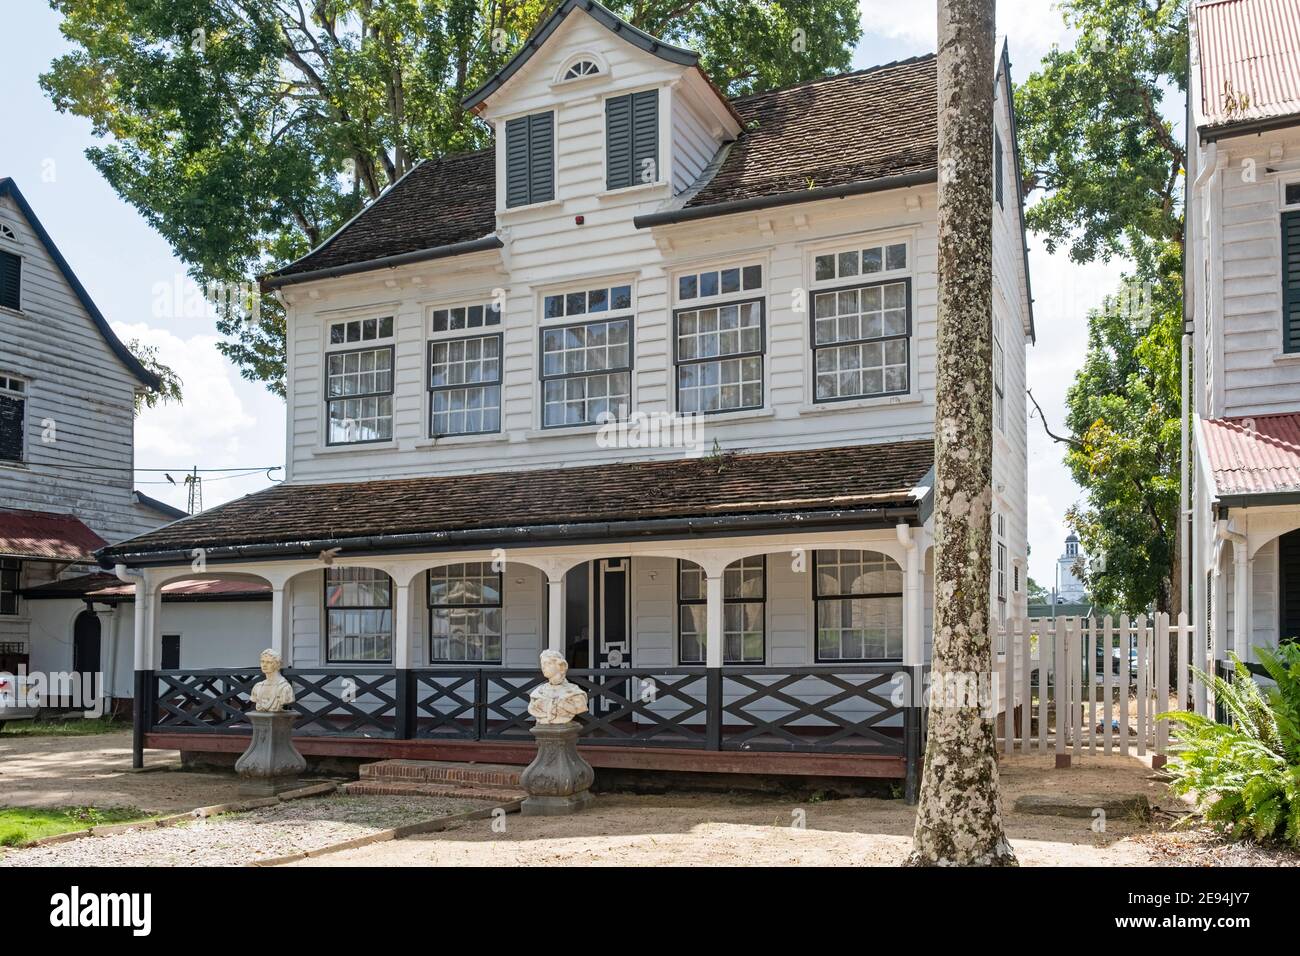 Dutch white wooden colonial officer's house at Fort Zeelandia, fortress in Paramaribo, Paramaribo District, Suriname / Surinam Stock Photo